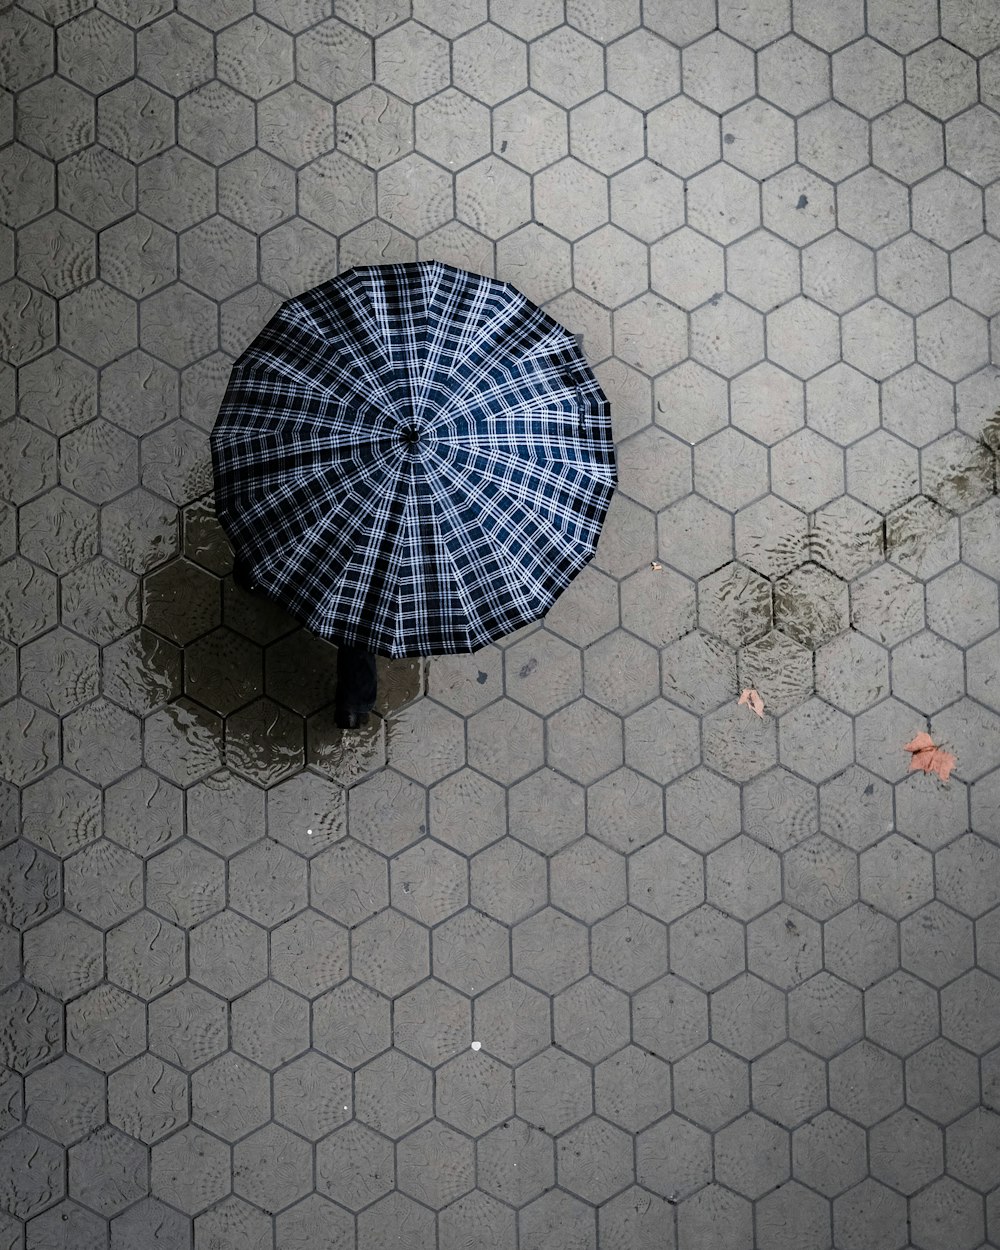 bird's eye view photograph of white and black umbrella on surface